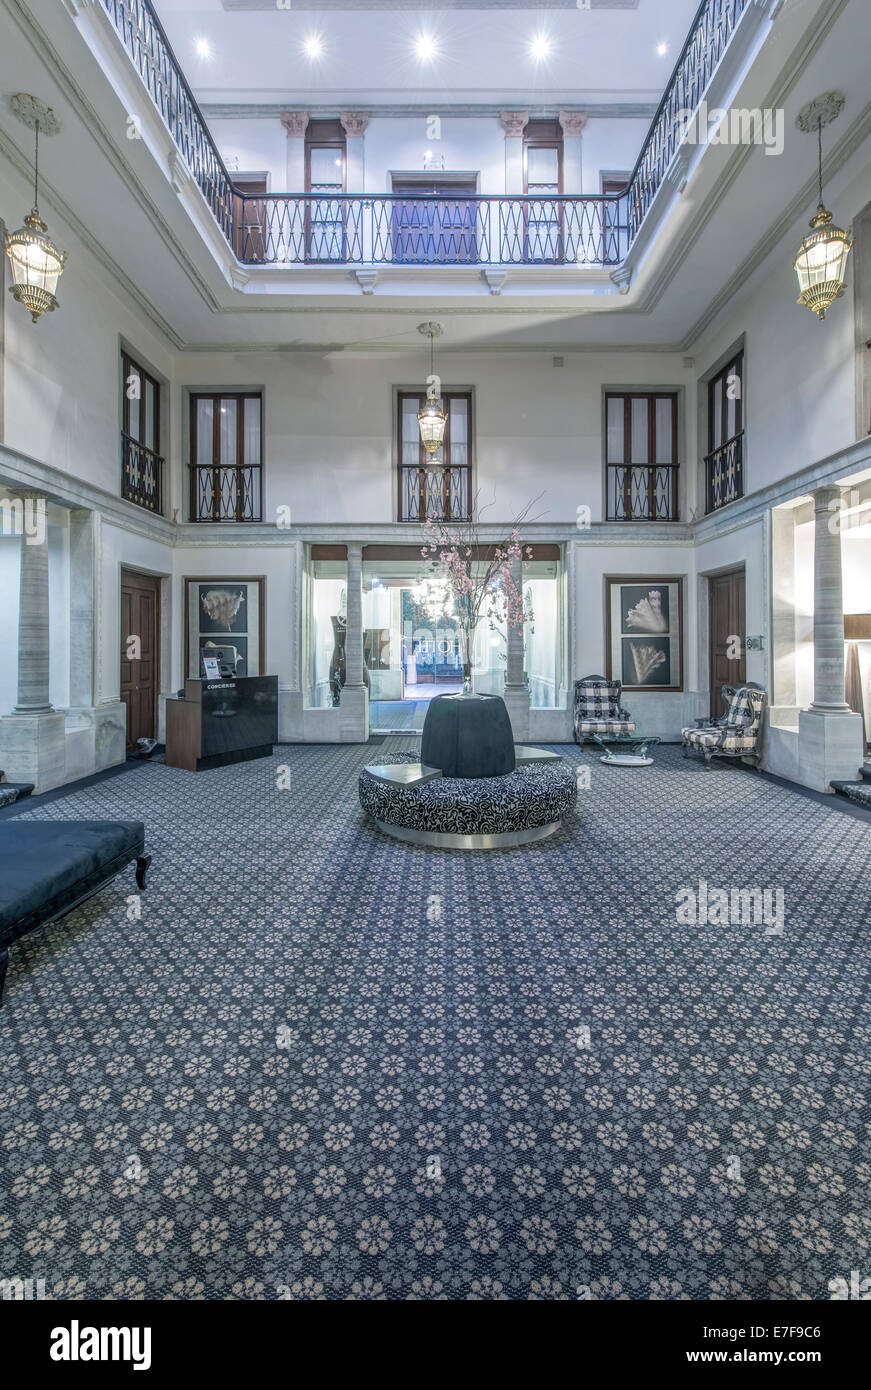 Seating and carpet in ornate hotel lobby Stock Photo